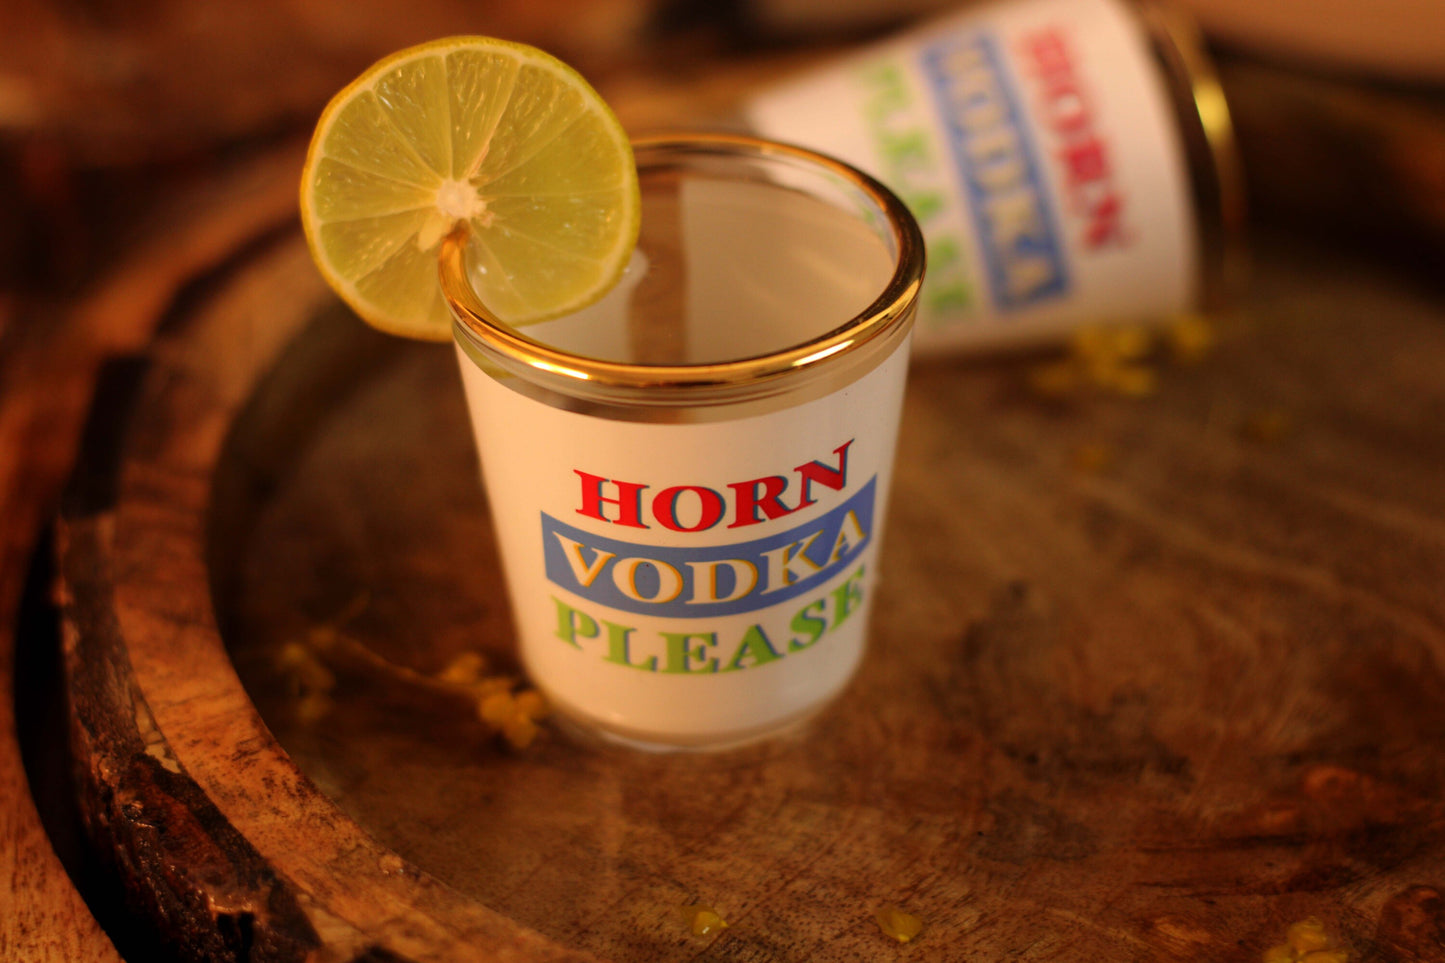 'In Your Style Horn Vodka Please' Shot Glasses Set of 2